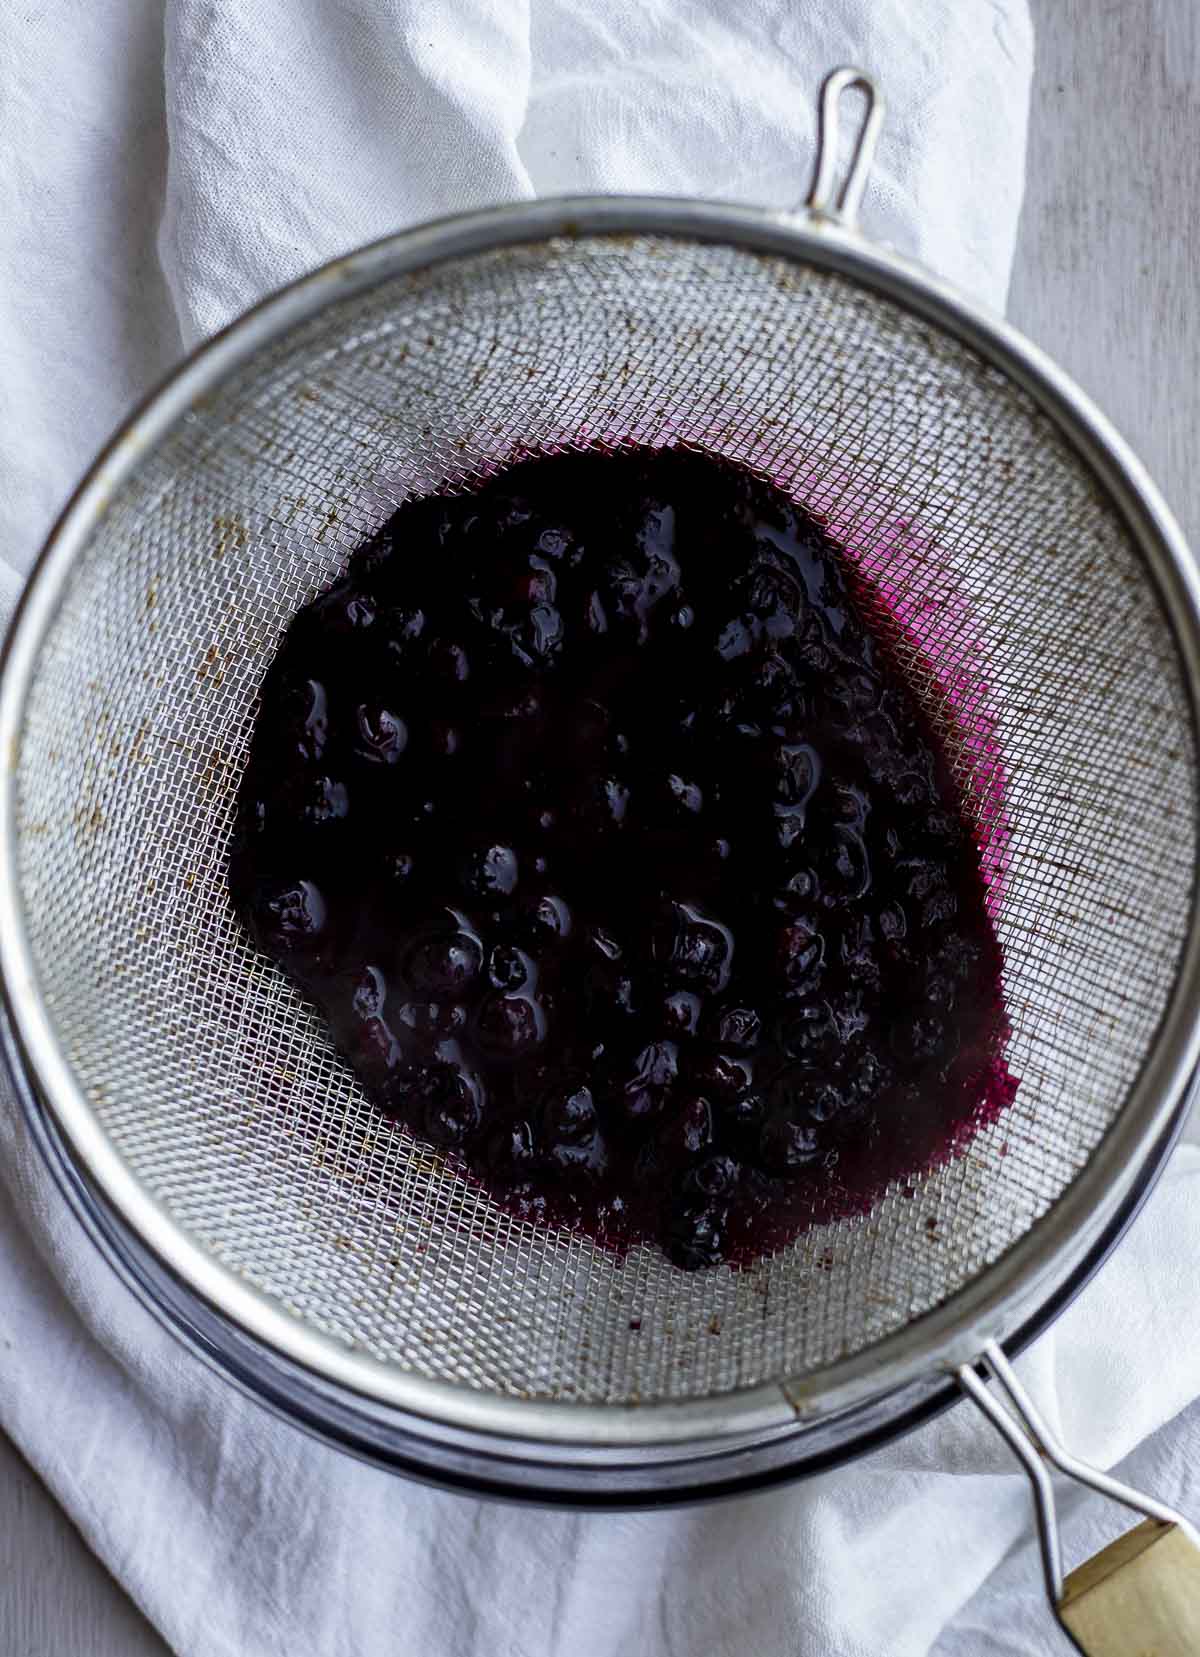 Blueberry mixture being strained in a mesh strainer.